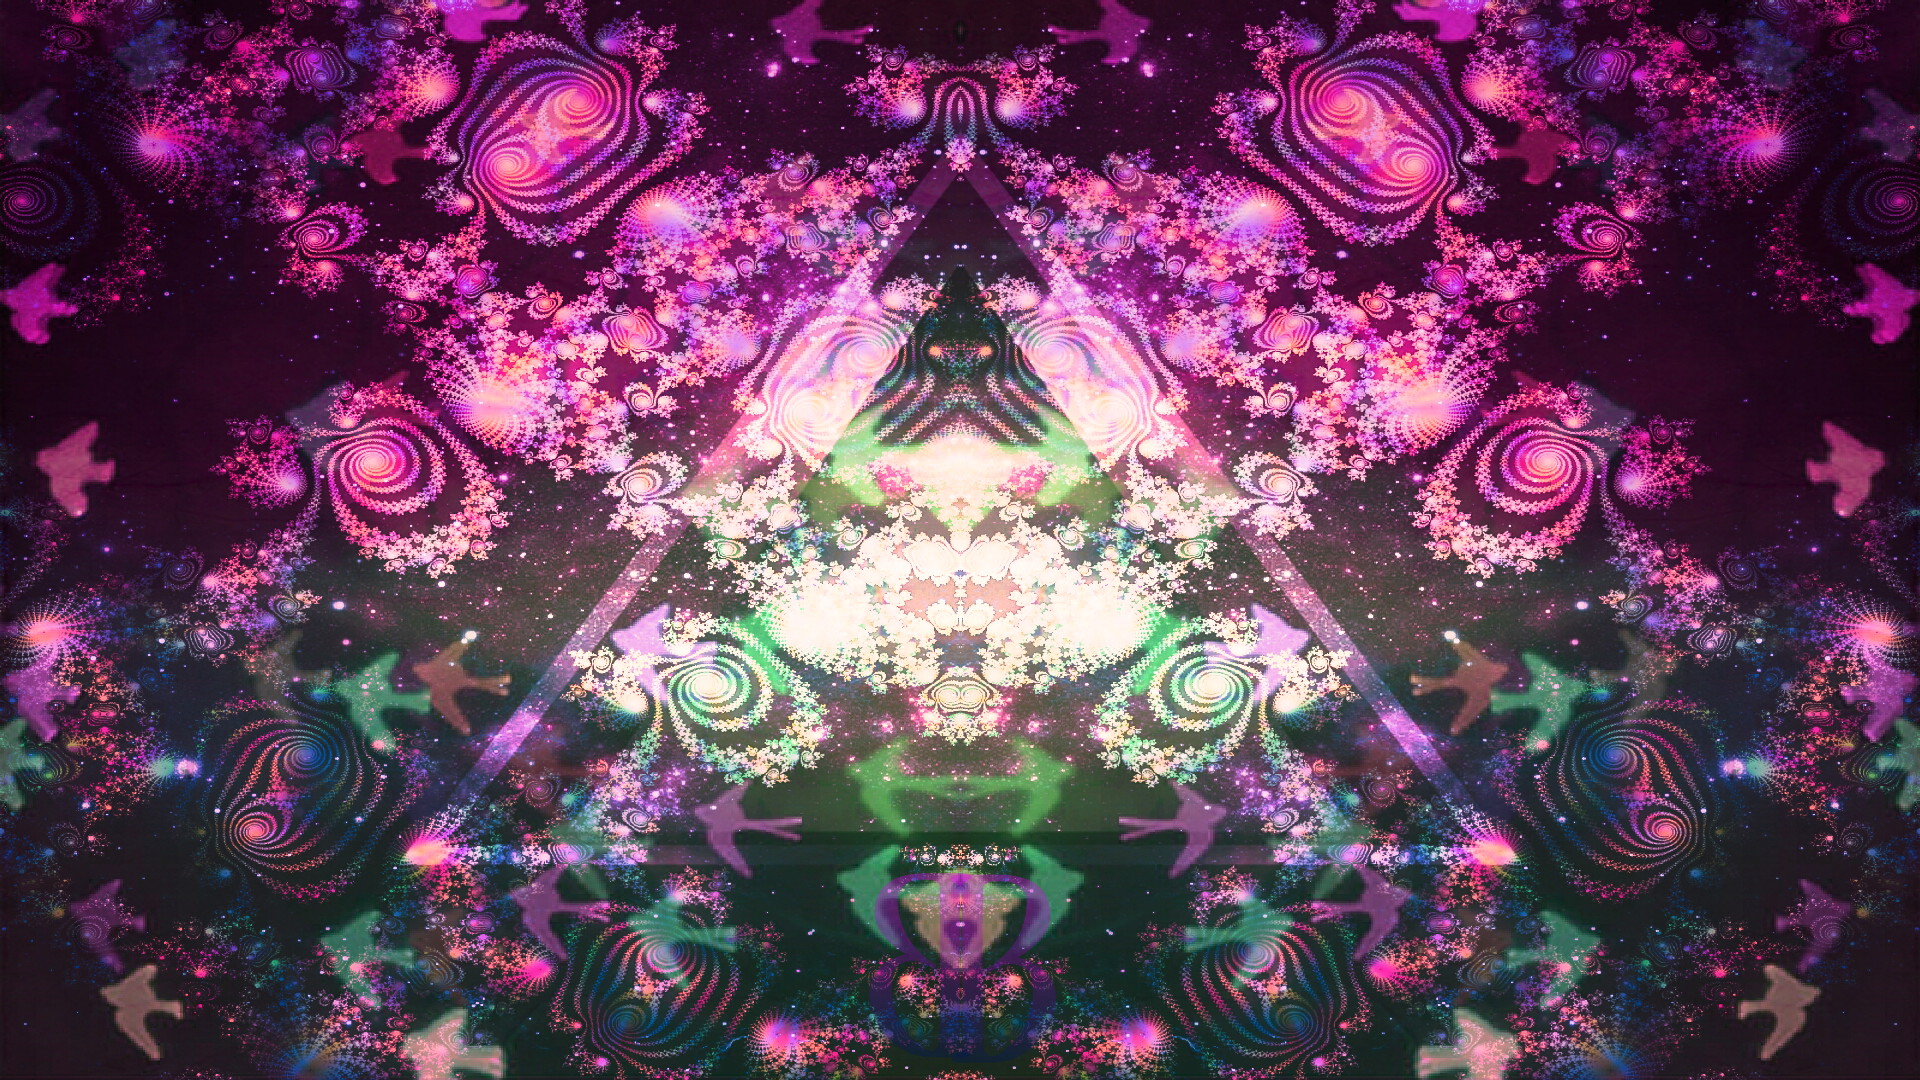 psychedelic, artistic wallpaper for mobile